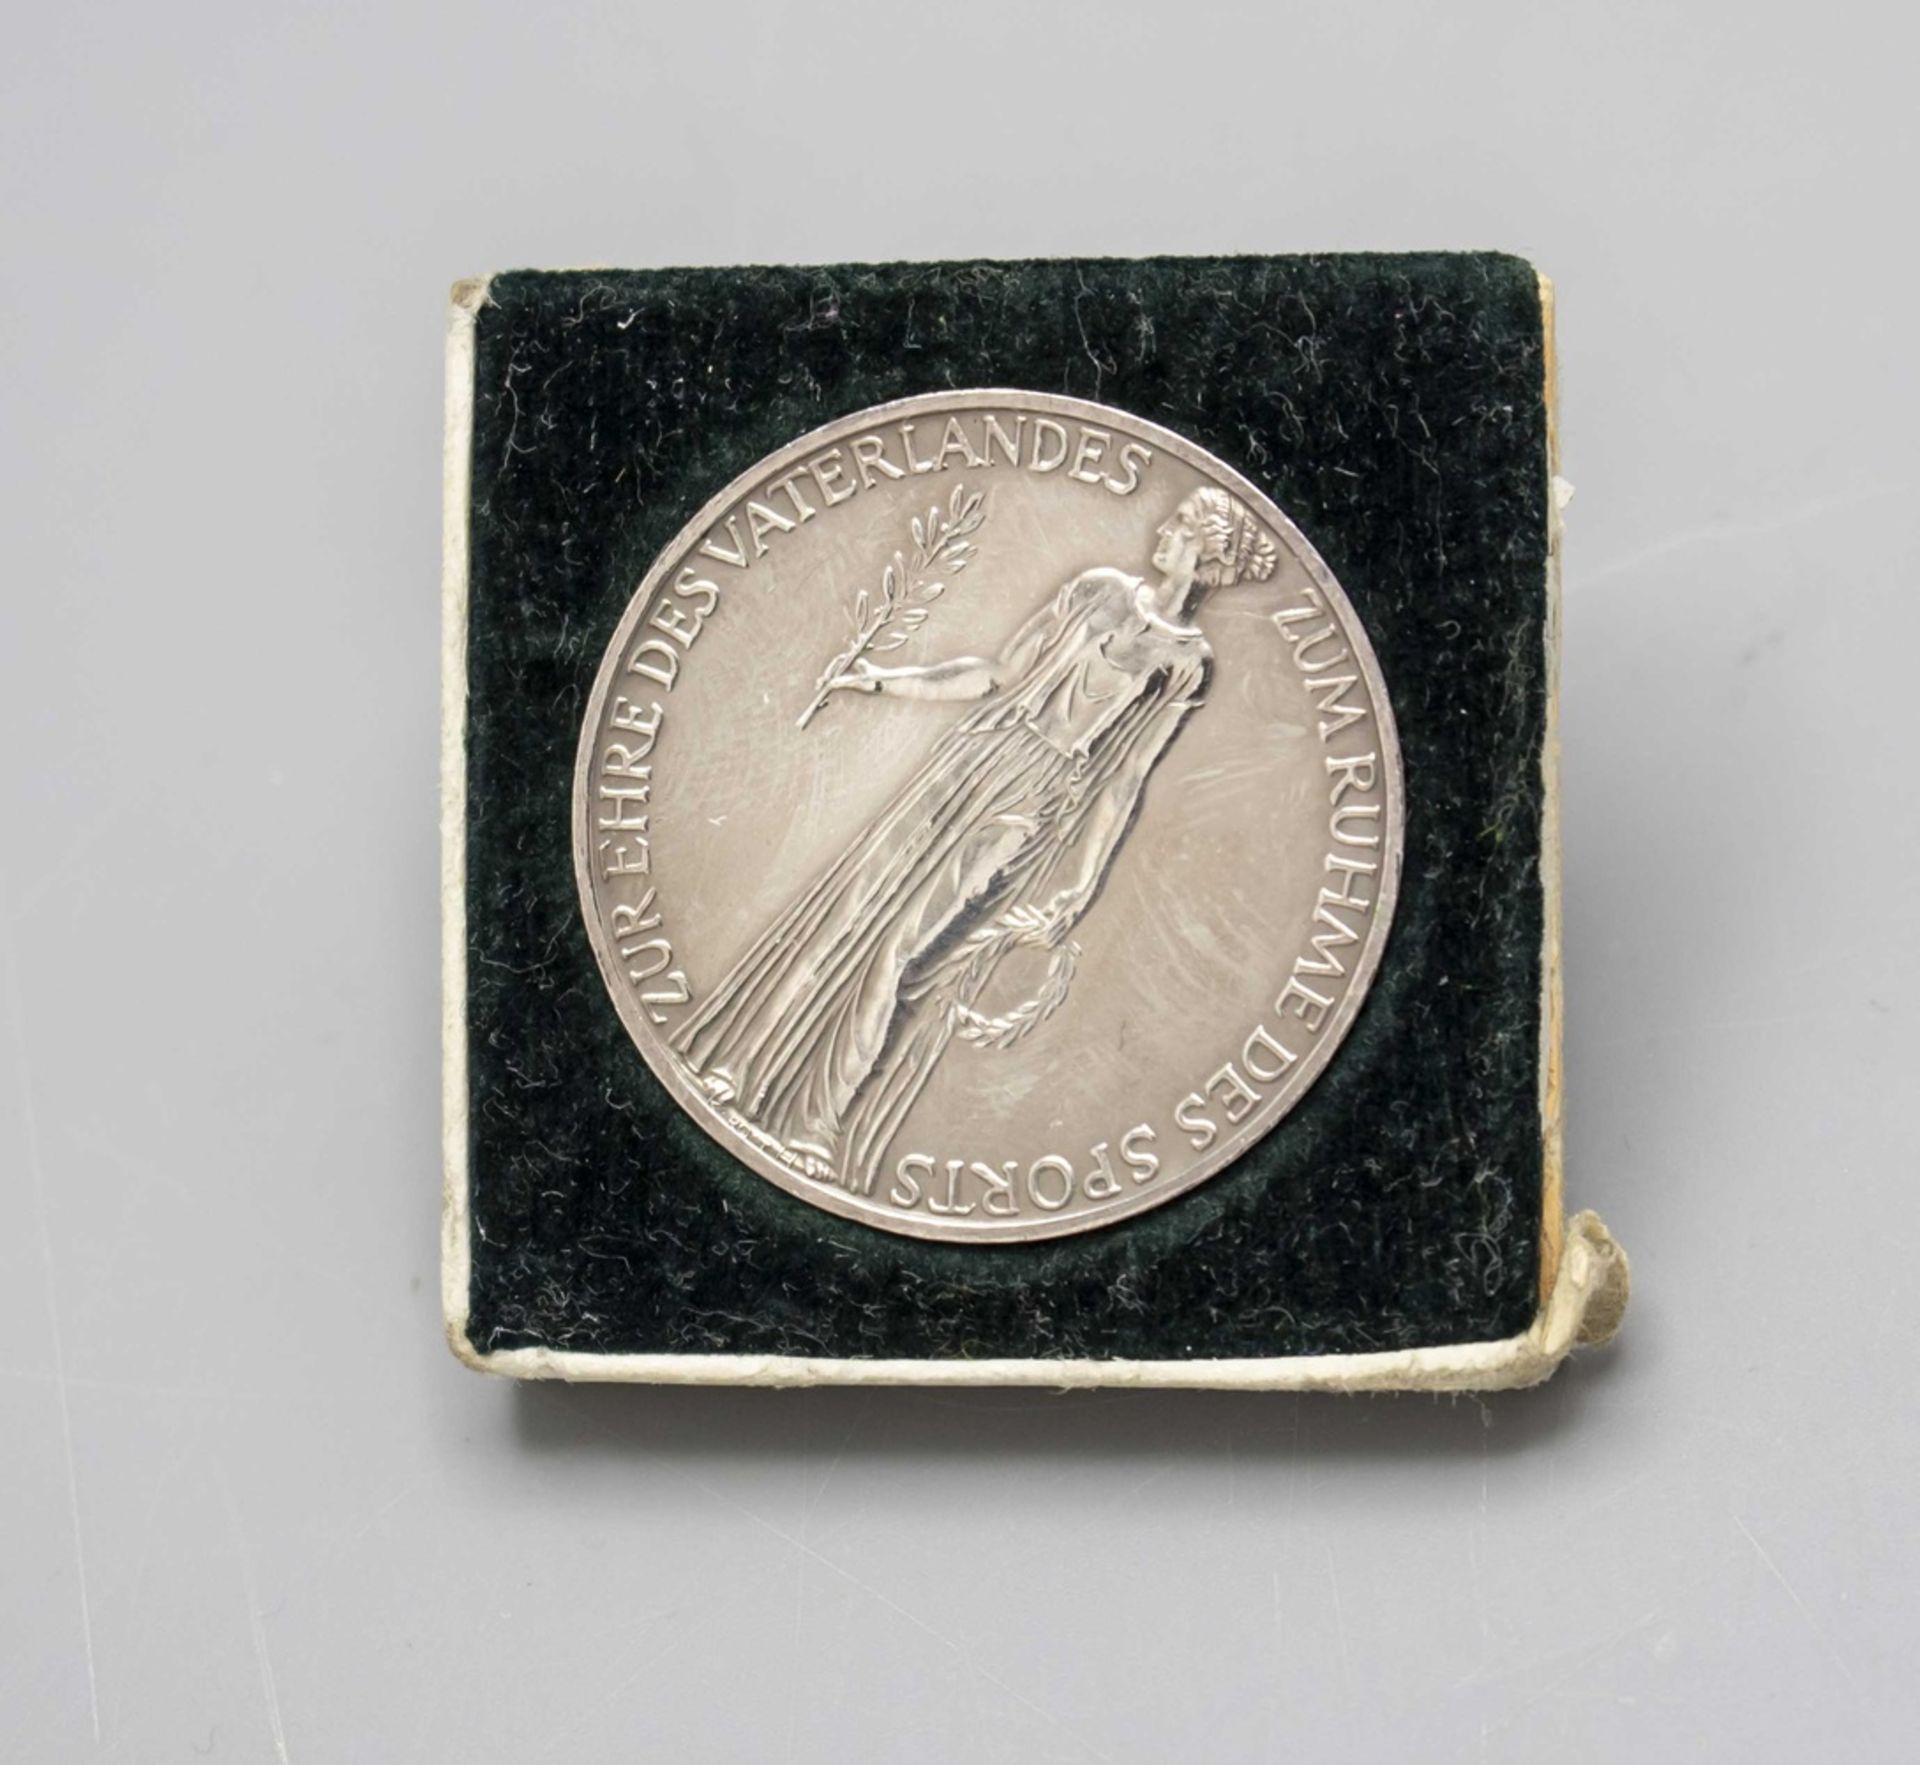 Erinnerungsmedaille / A silver commemorative medal, Olympische Spiele 1936